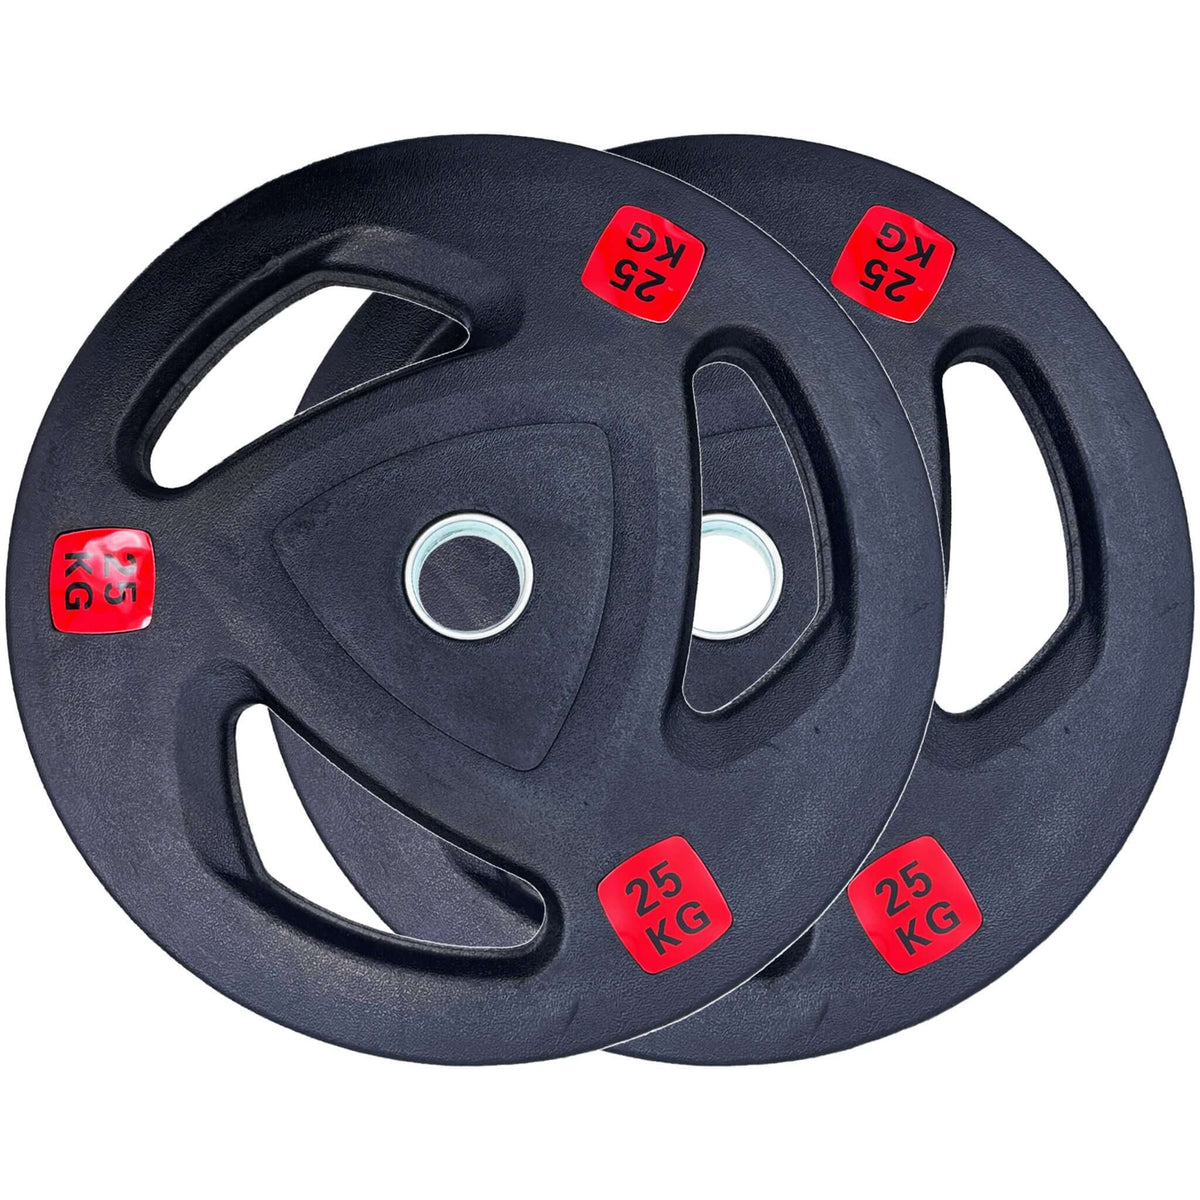 25kg Rubber Tri-grip Weight Plates Type-A Pairs | INSOURCE